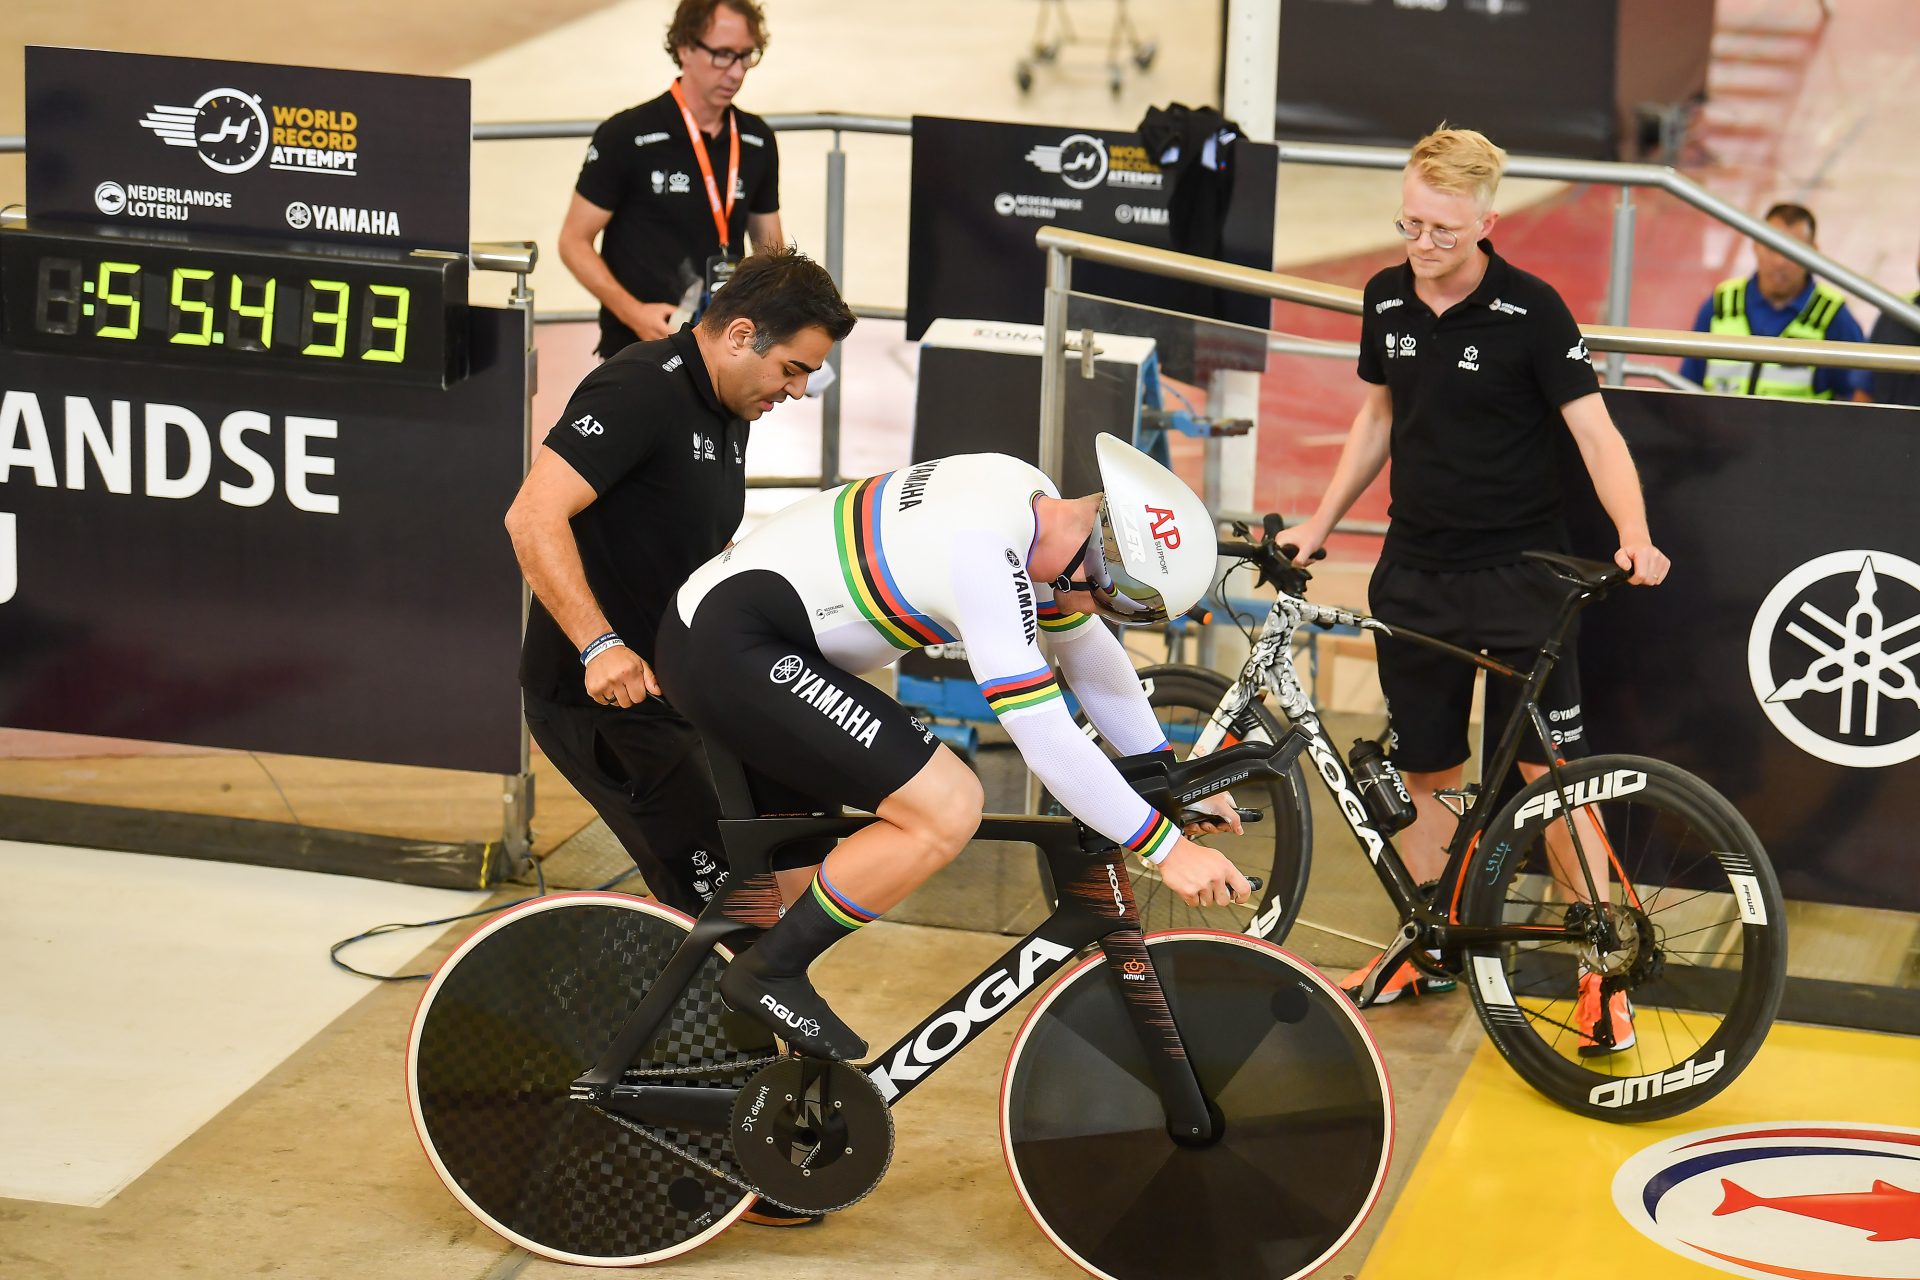 The photo shows Jeffrey Hoogland at the UCI Kilo world record attempt